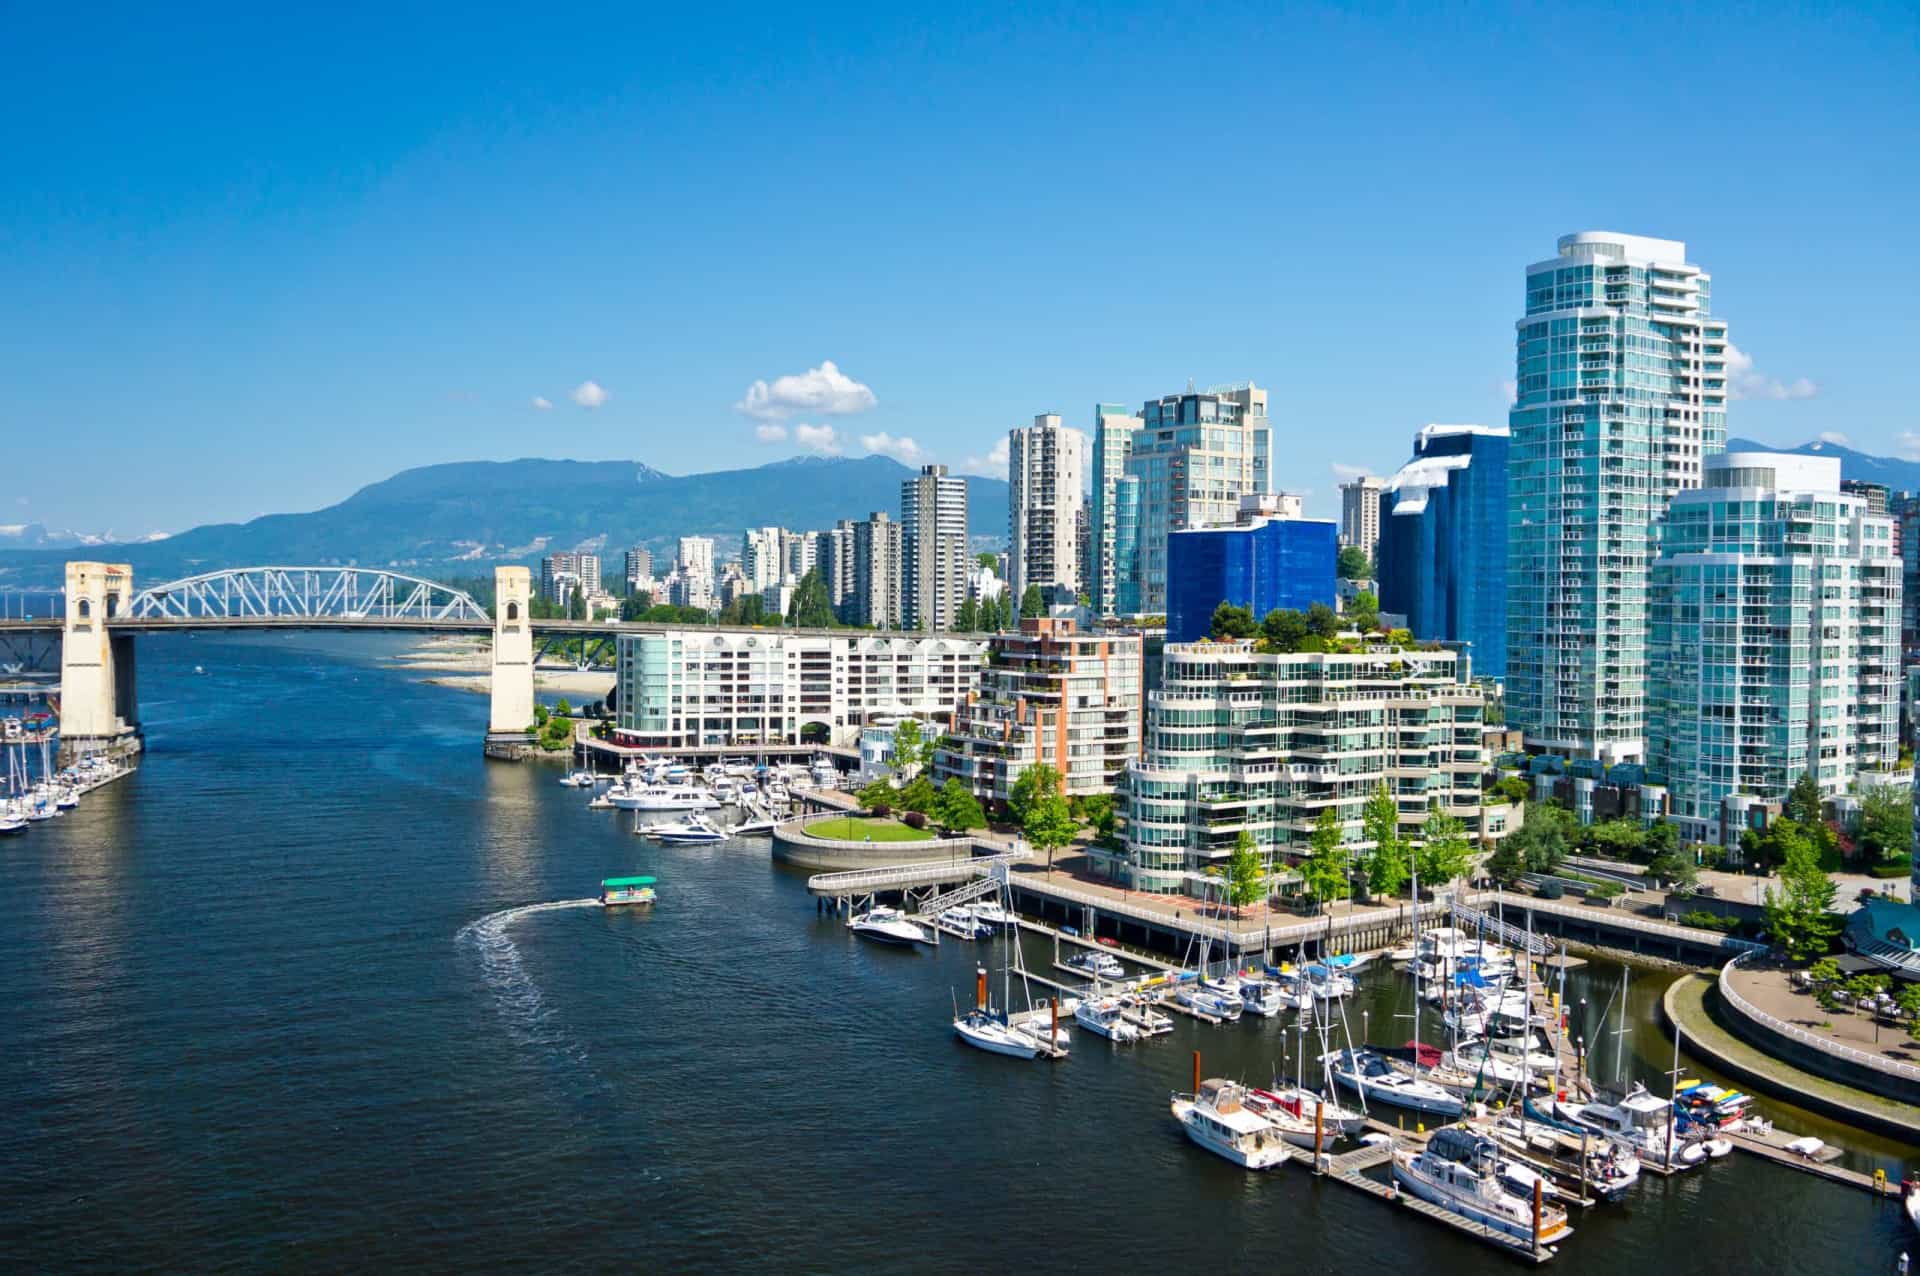 <p>Vancouver is a great destination for an outdoorsy holiday, but not too wild. A Taurus can stay in a nice hotel in the city center while taking advantage of all the activities involving nature, like kayaking at Jericho Beach or going on a whale-watching tour.</p>